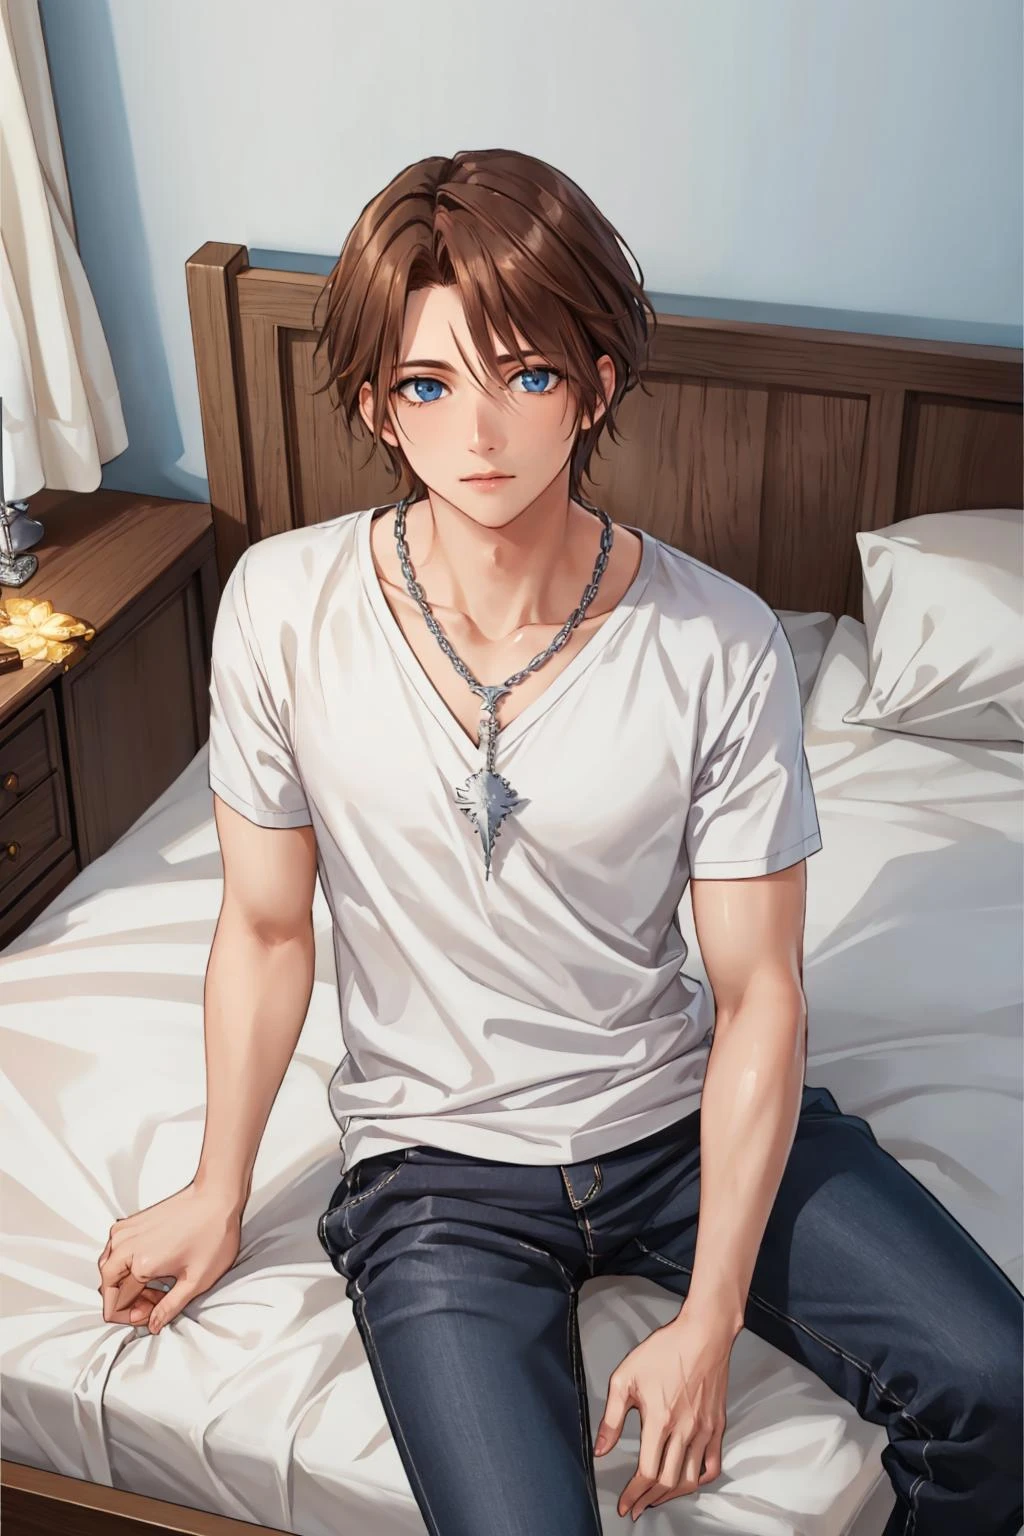 masterpiece, best quality, squall, scar, necklace, bedroom, white t-shirt, pajama pants, sitting, white walls, from above, looking at viewer